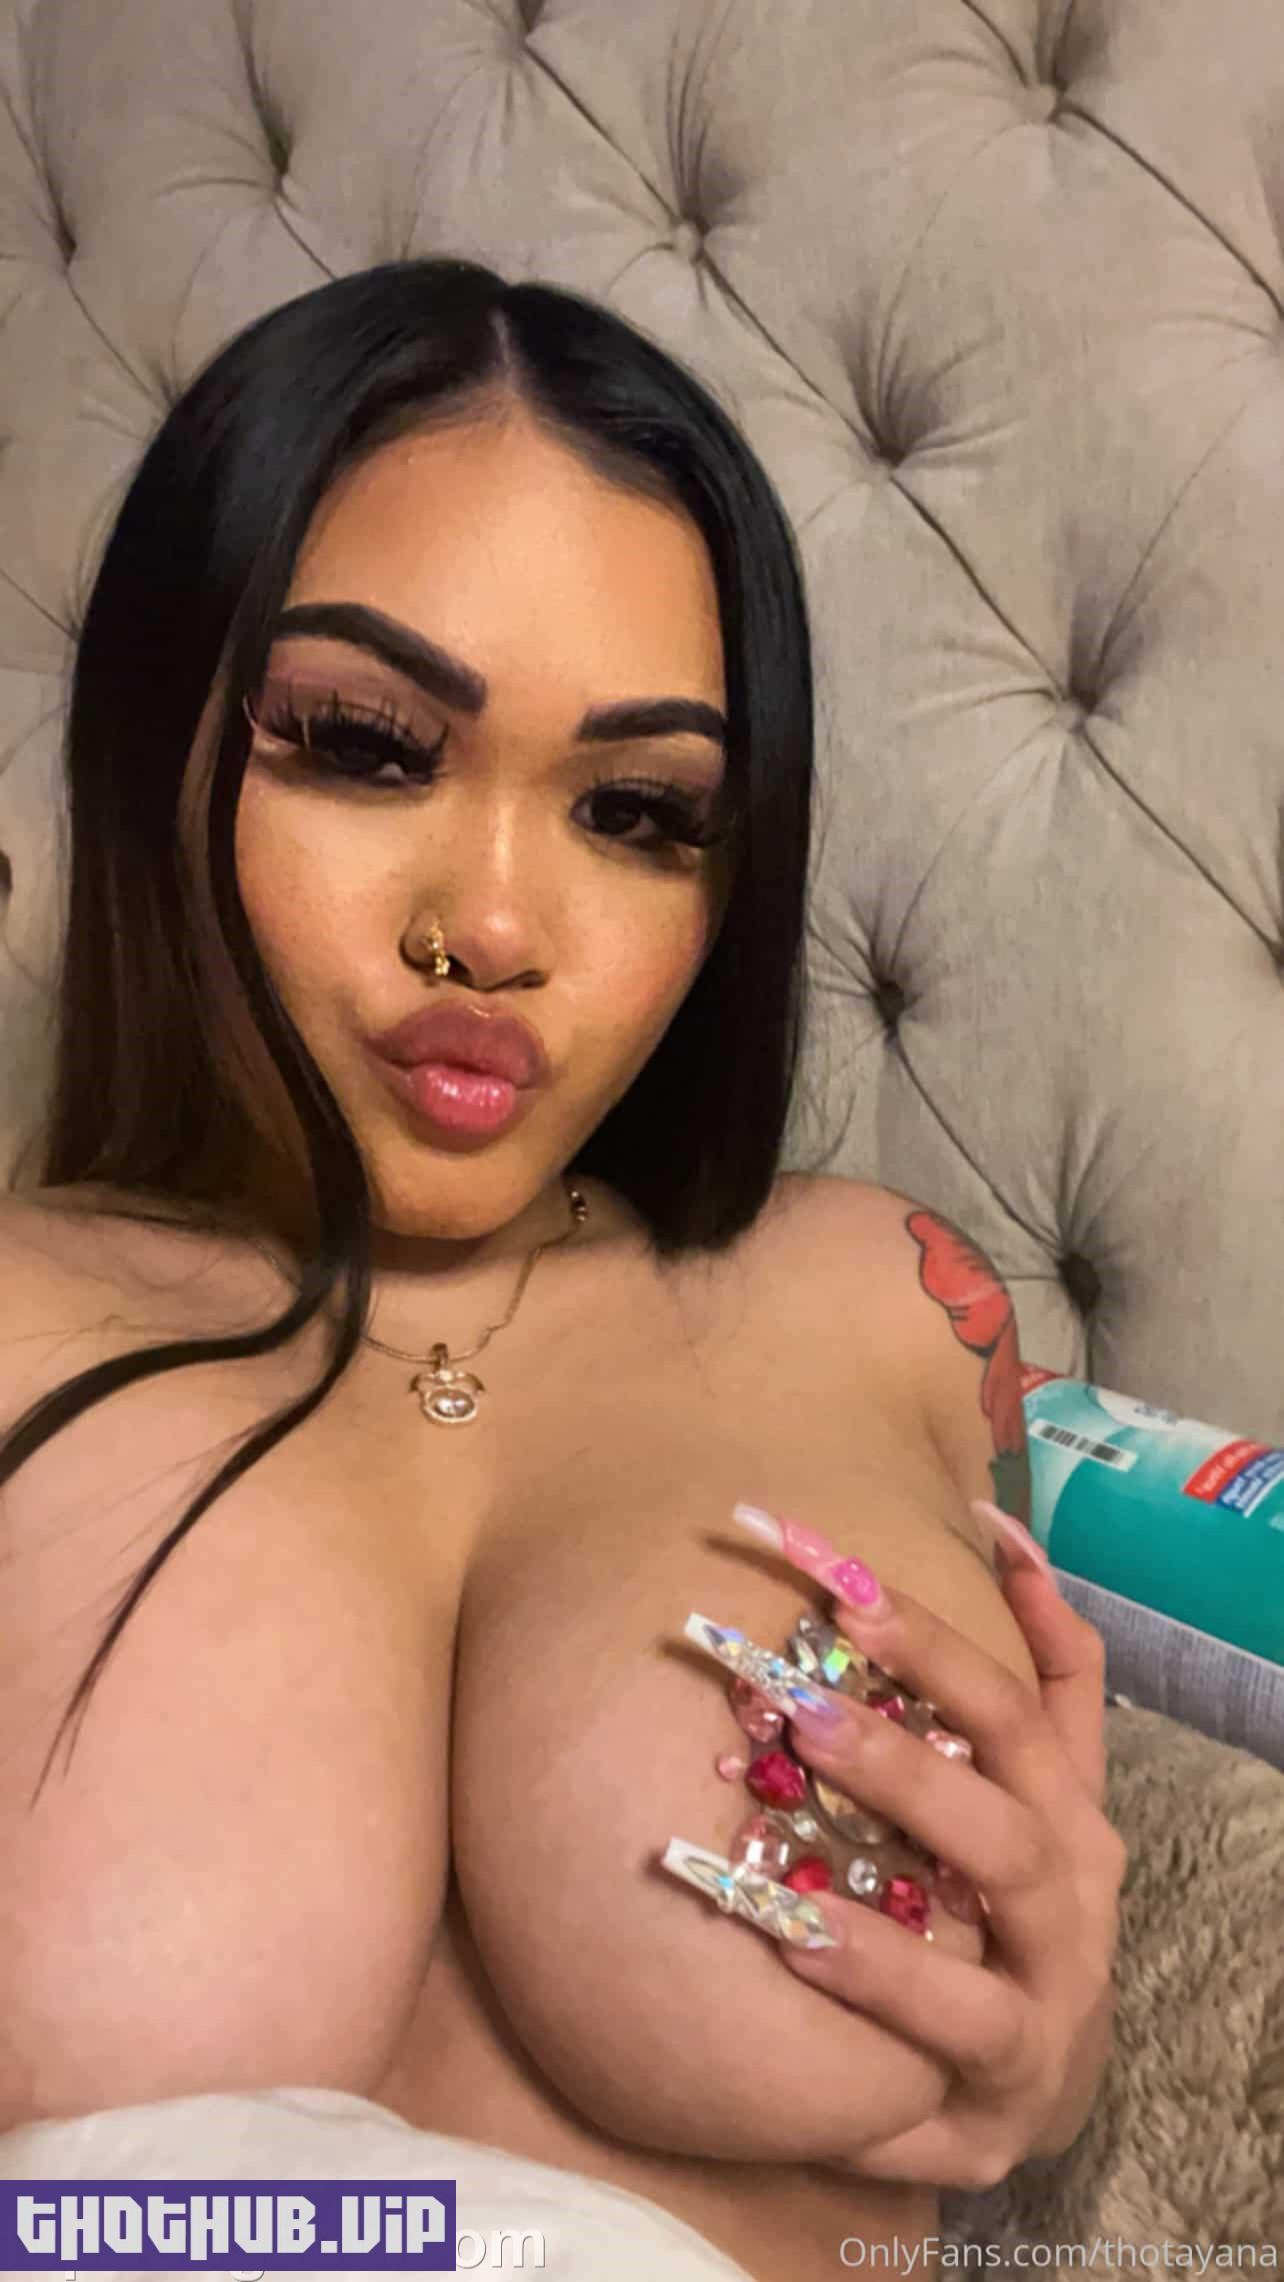 1660939615 527 Thotayana %E2%80%93 Busty Asian Thot Onlyfans Nudes